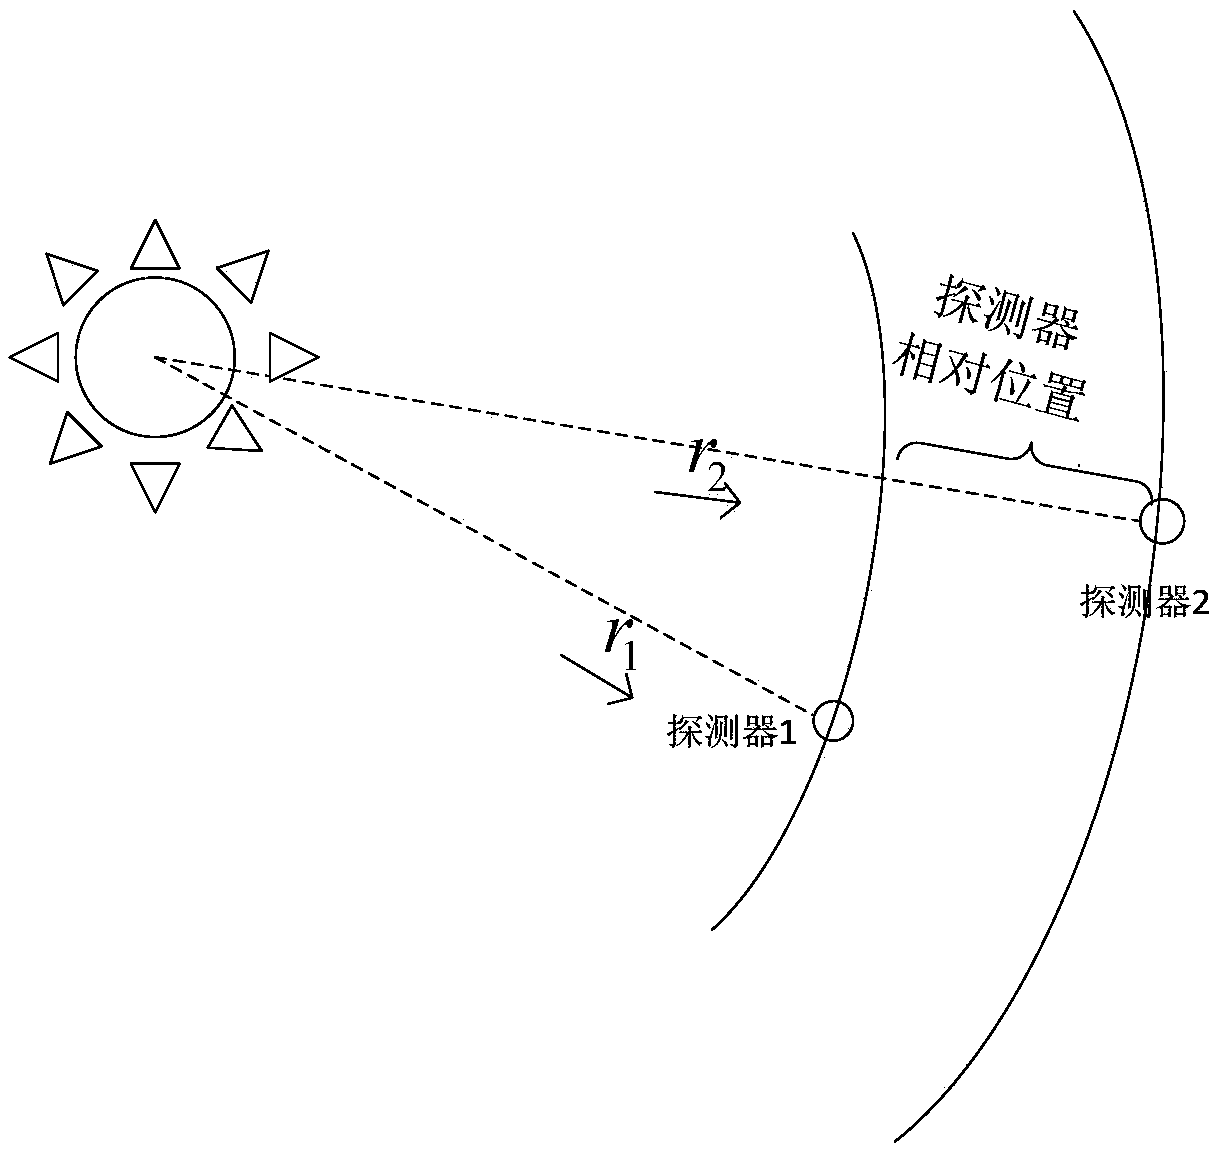 Solar TDOA measuring method faced to formation flying and combined navigation method